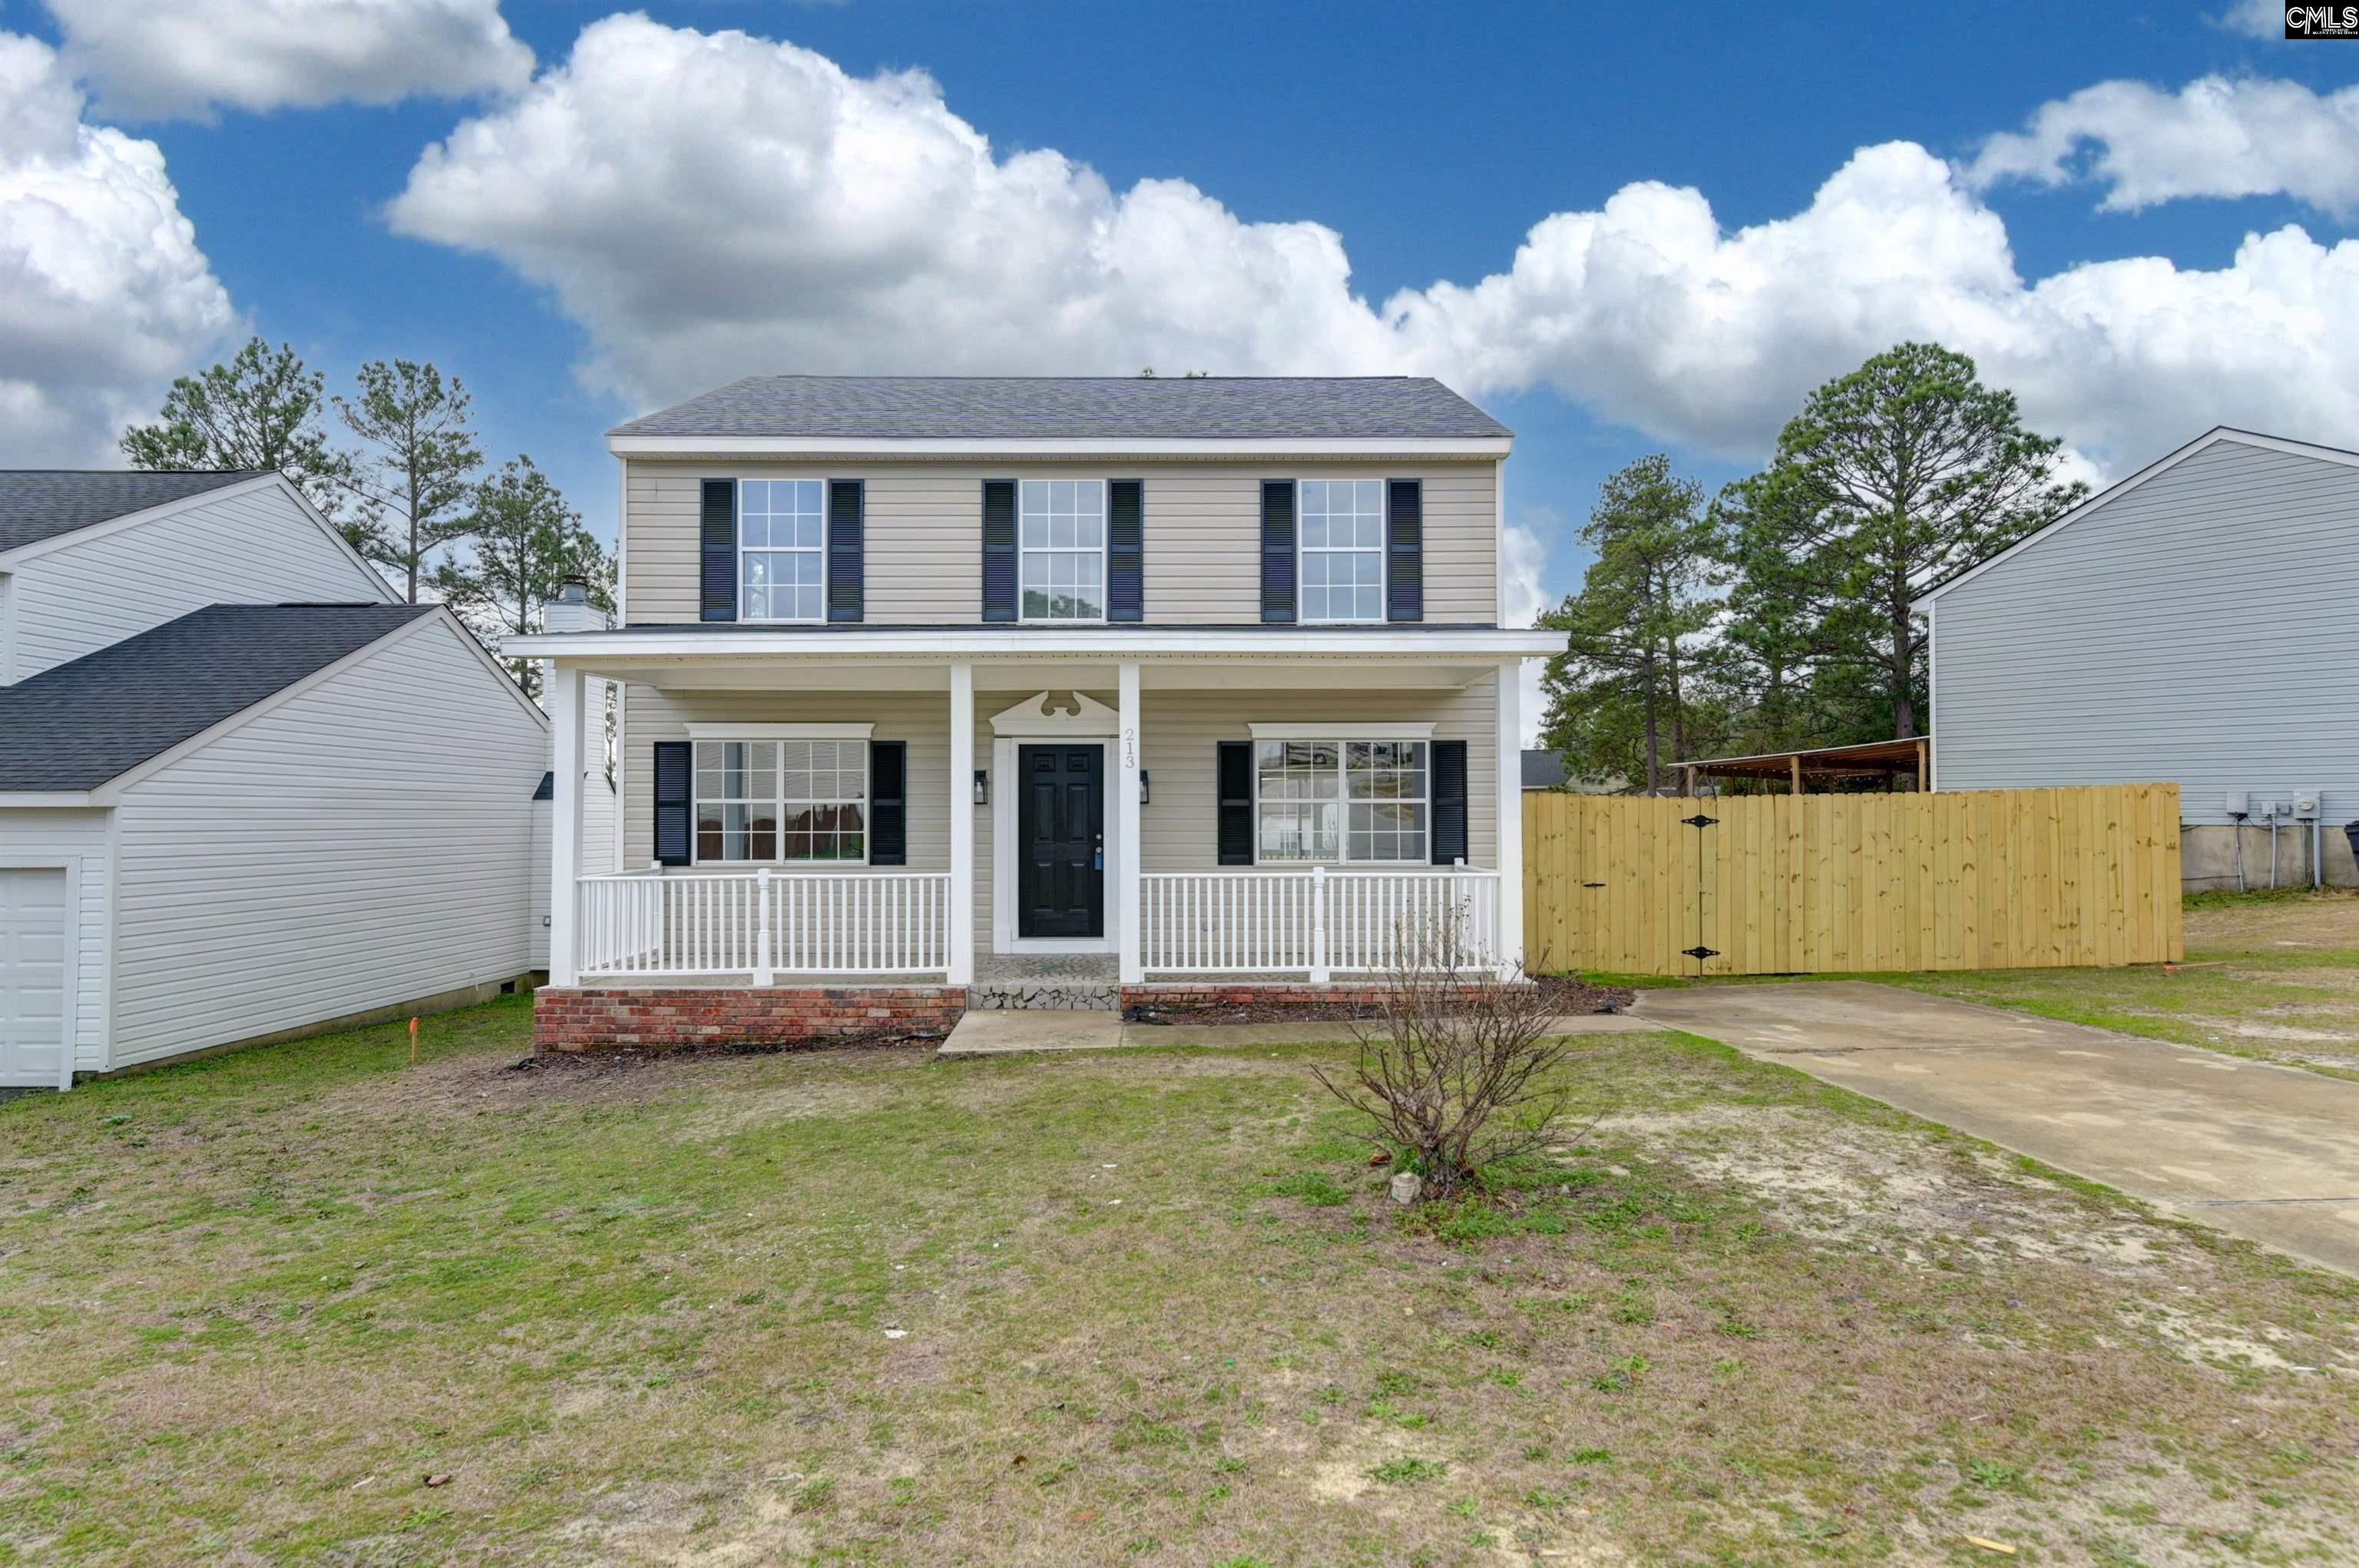 213 Orchard Hill Drive West Columbia, SC 29170